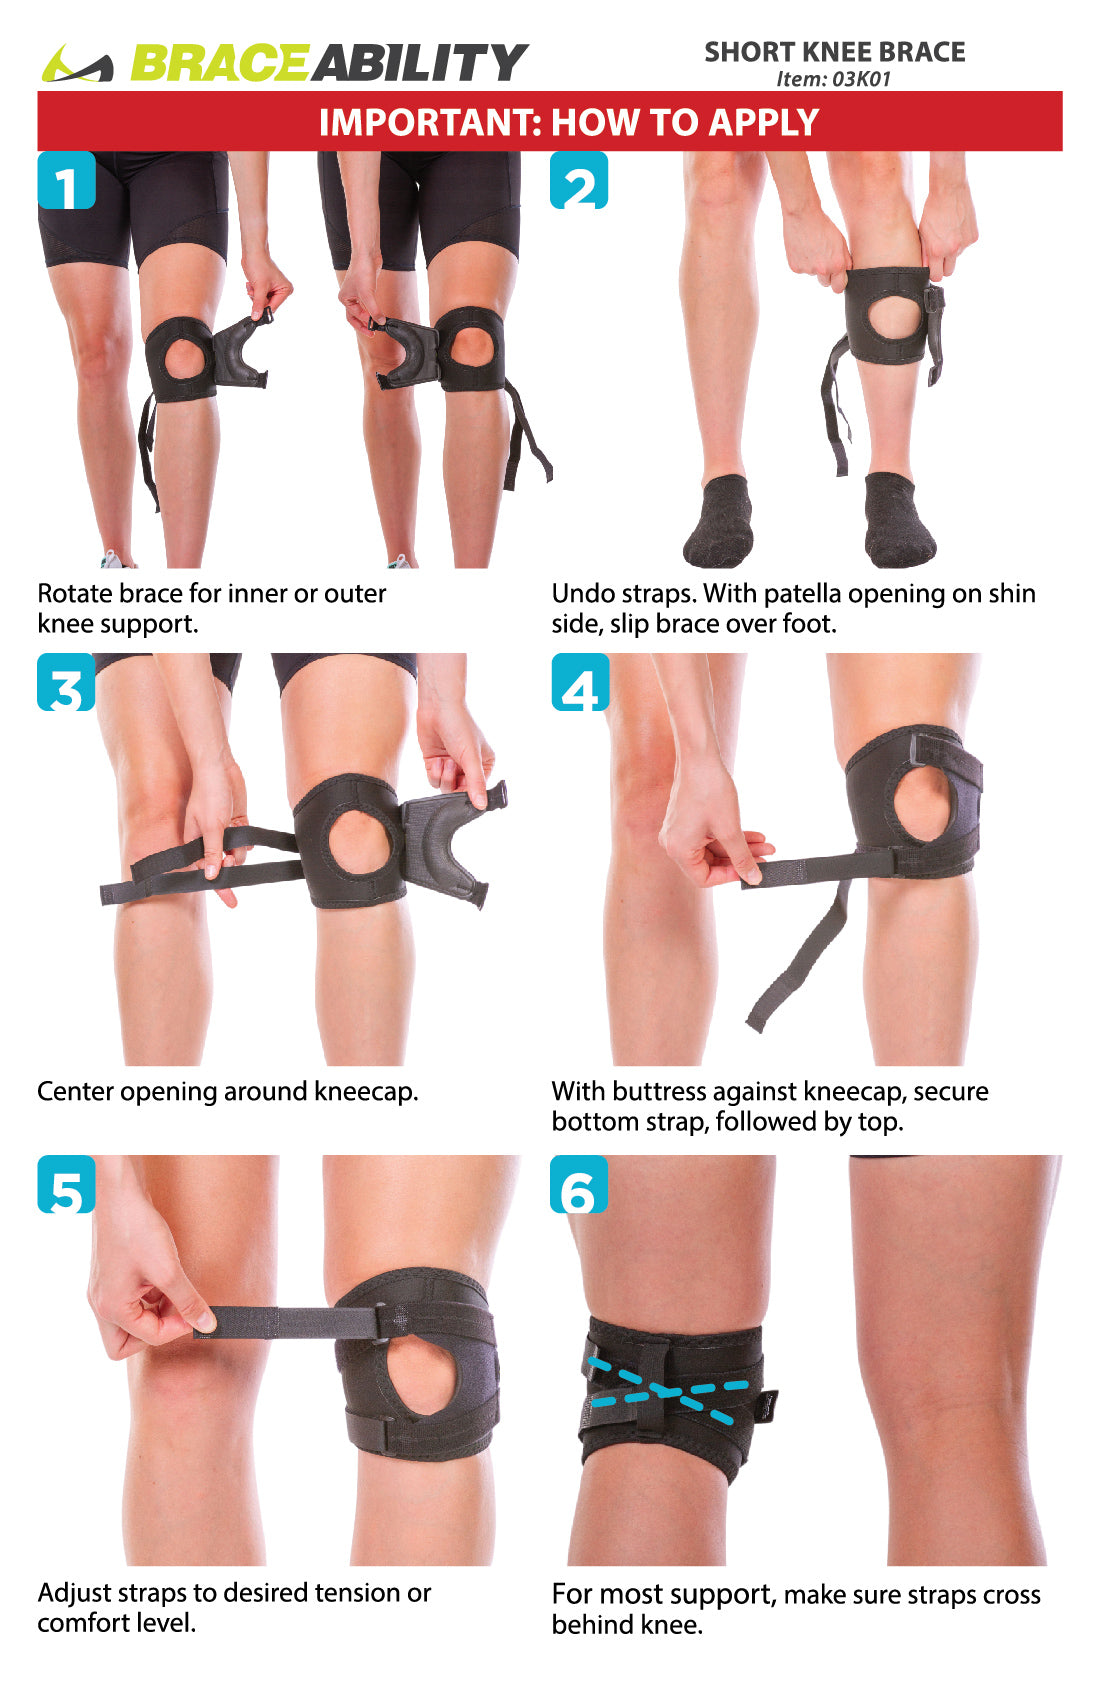 The short knee brace instruction sheet is a sleeve style base with two adjustable straps for patella tension